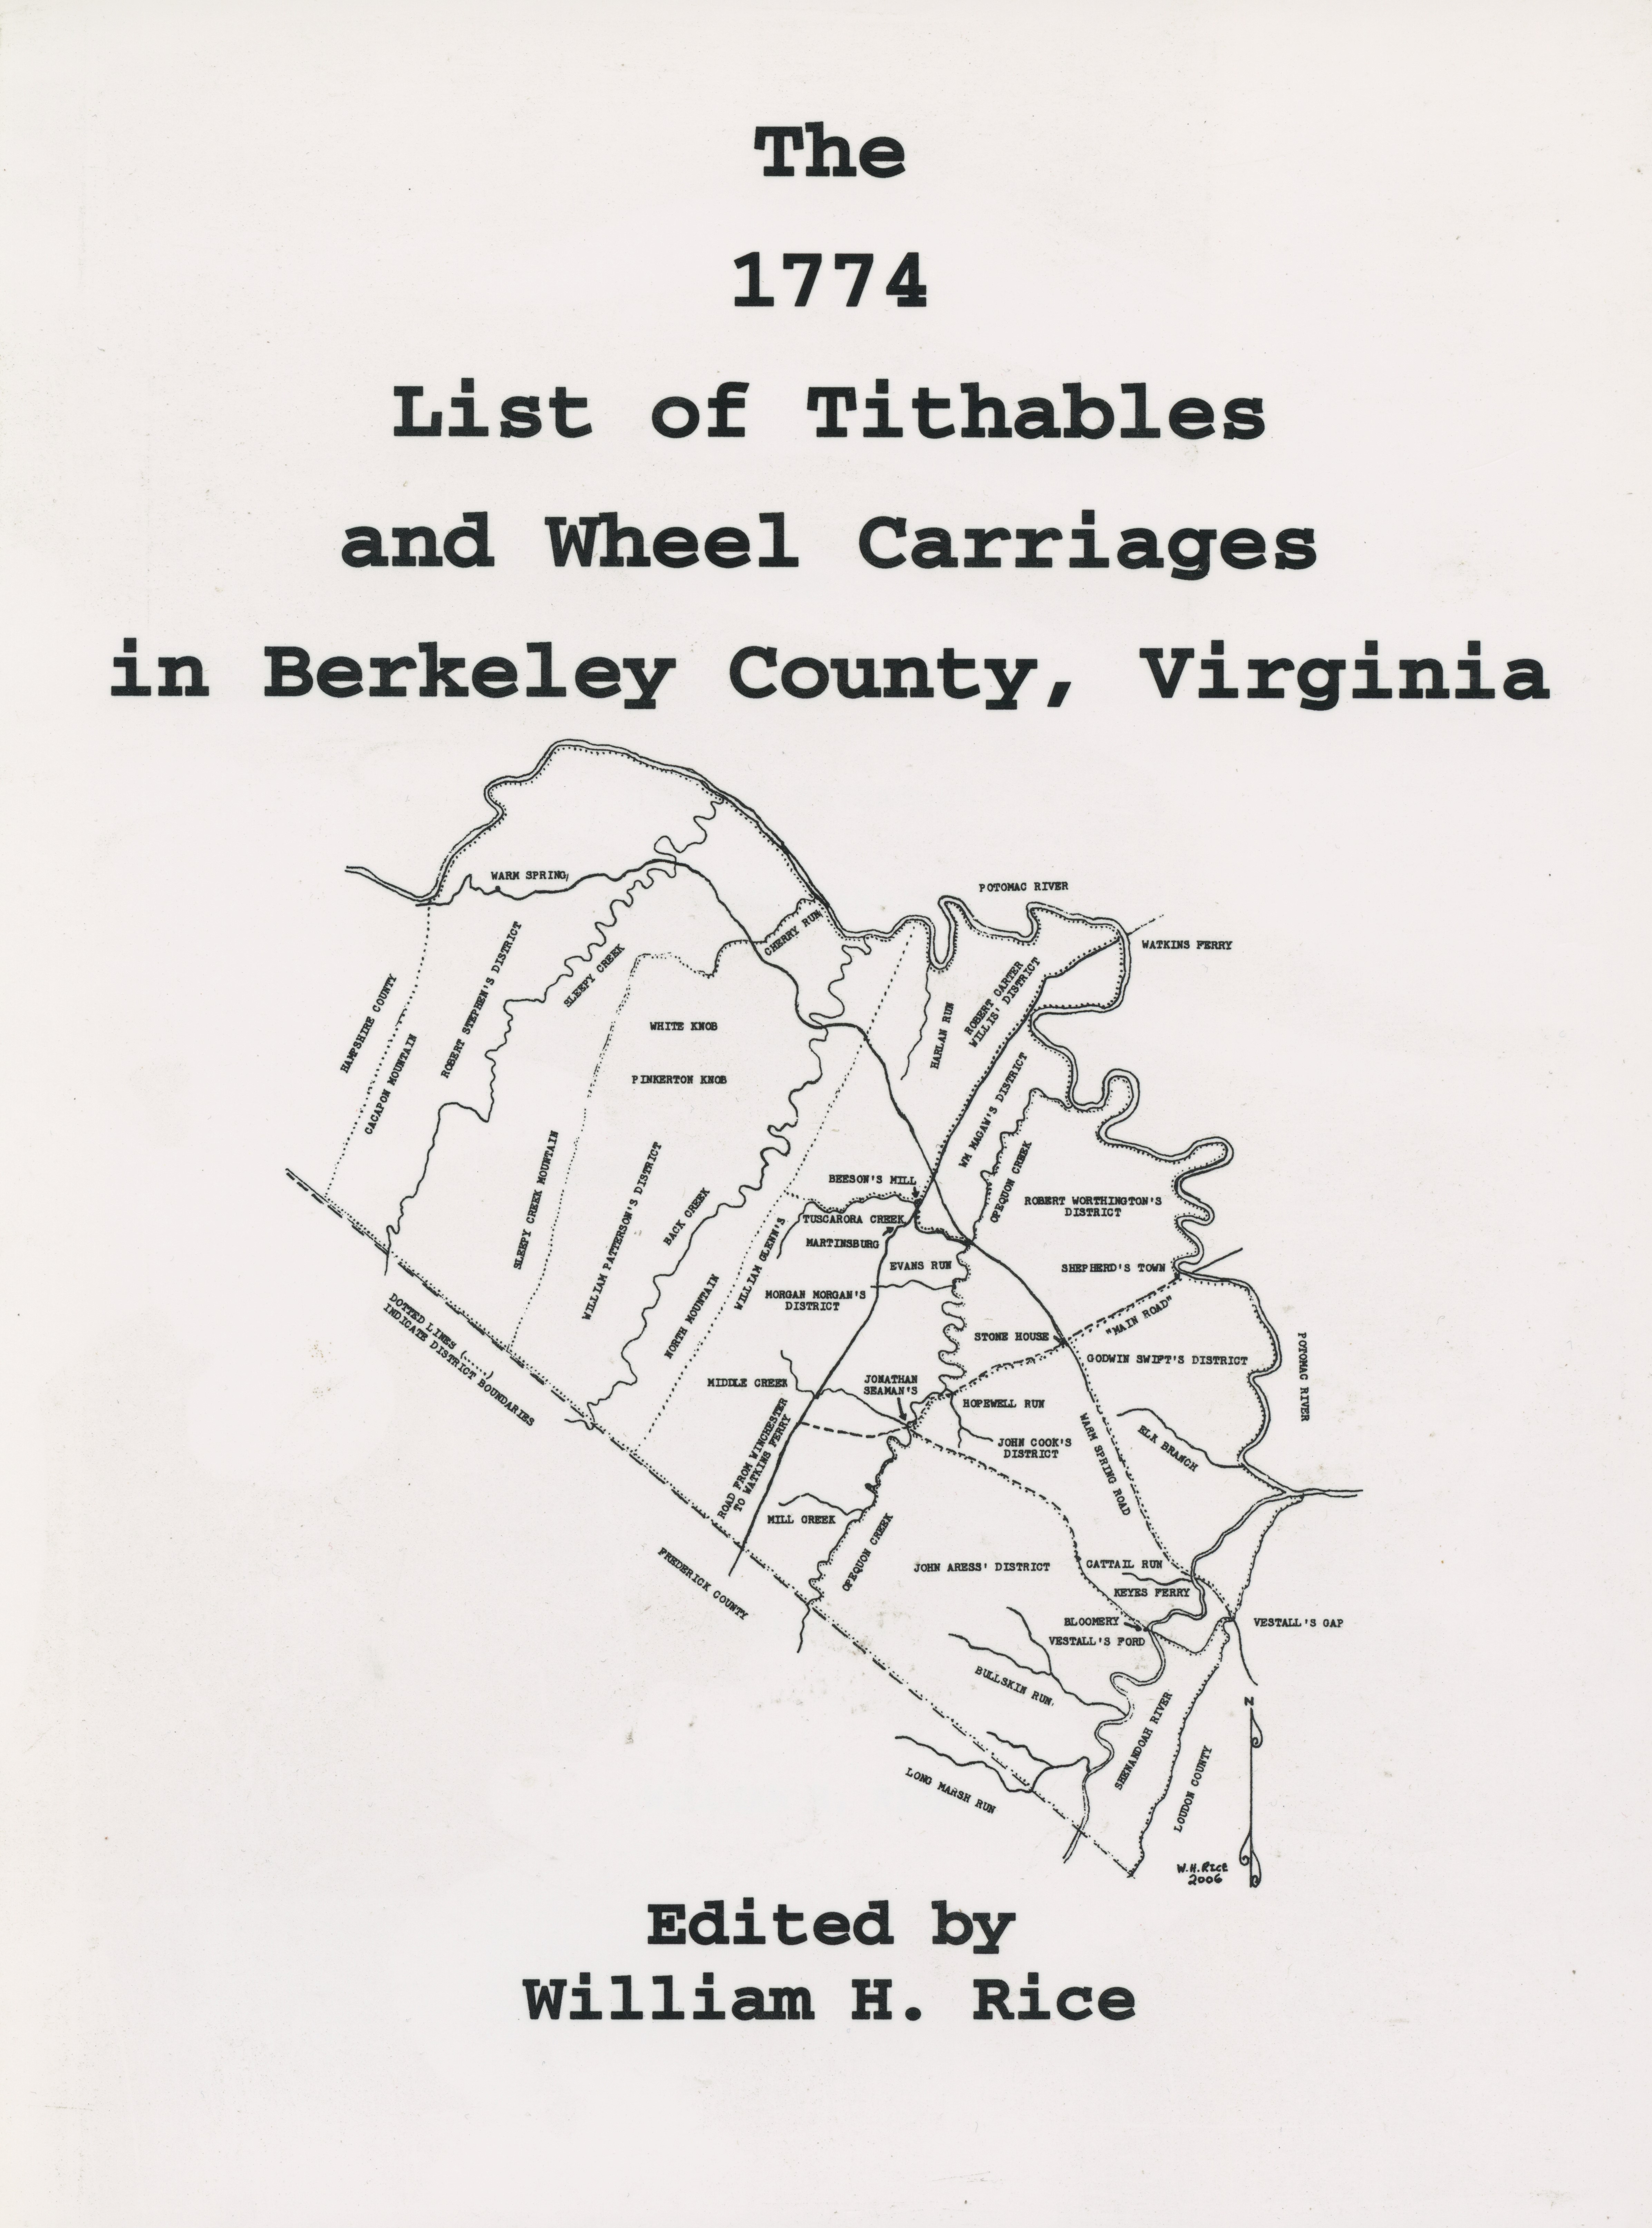 The 1774 List of Tithables and Wheel Carriages in Berkeley County, Virginia